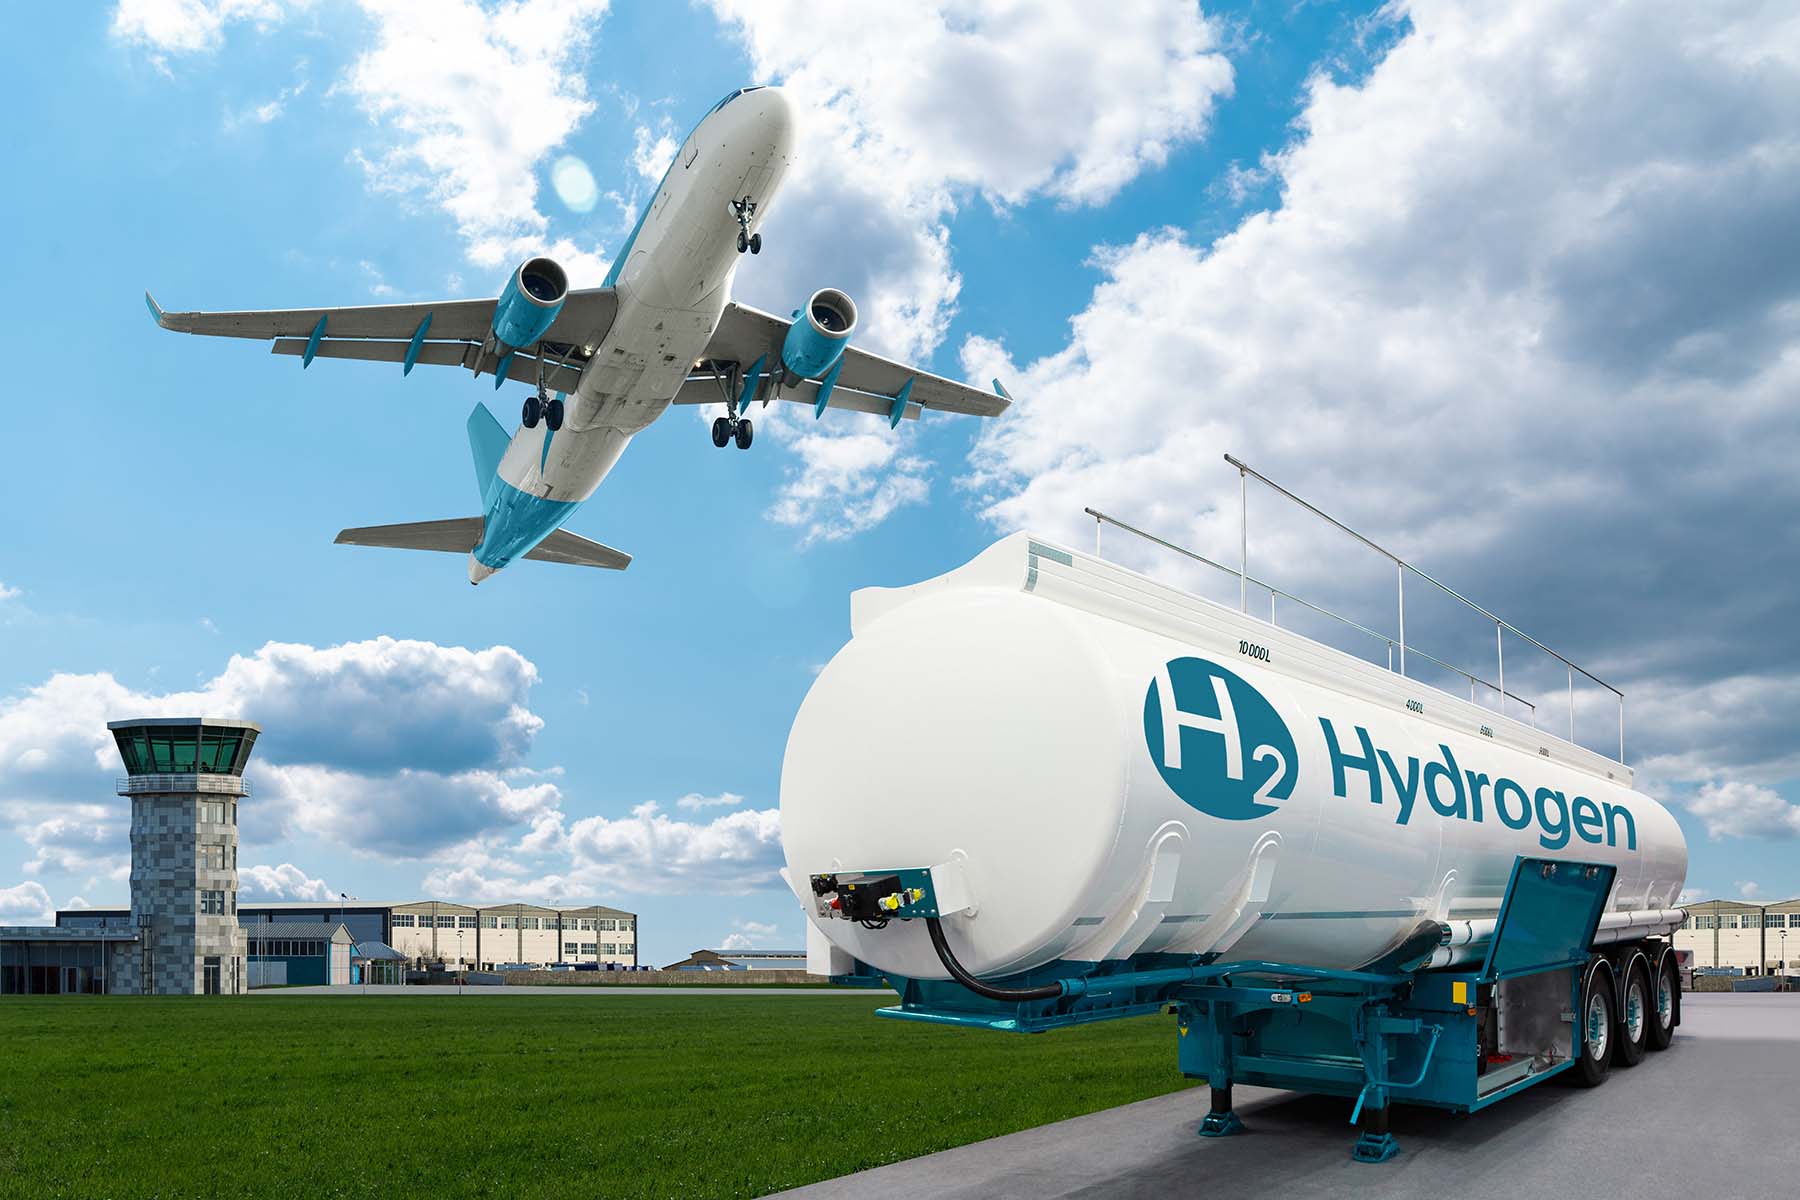 An aeroplane takes off with a hydrogen tanker in the foreground